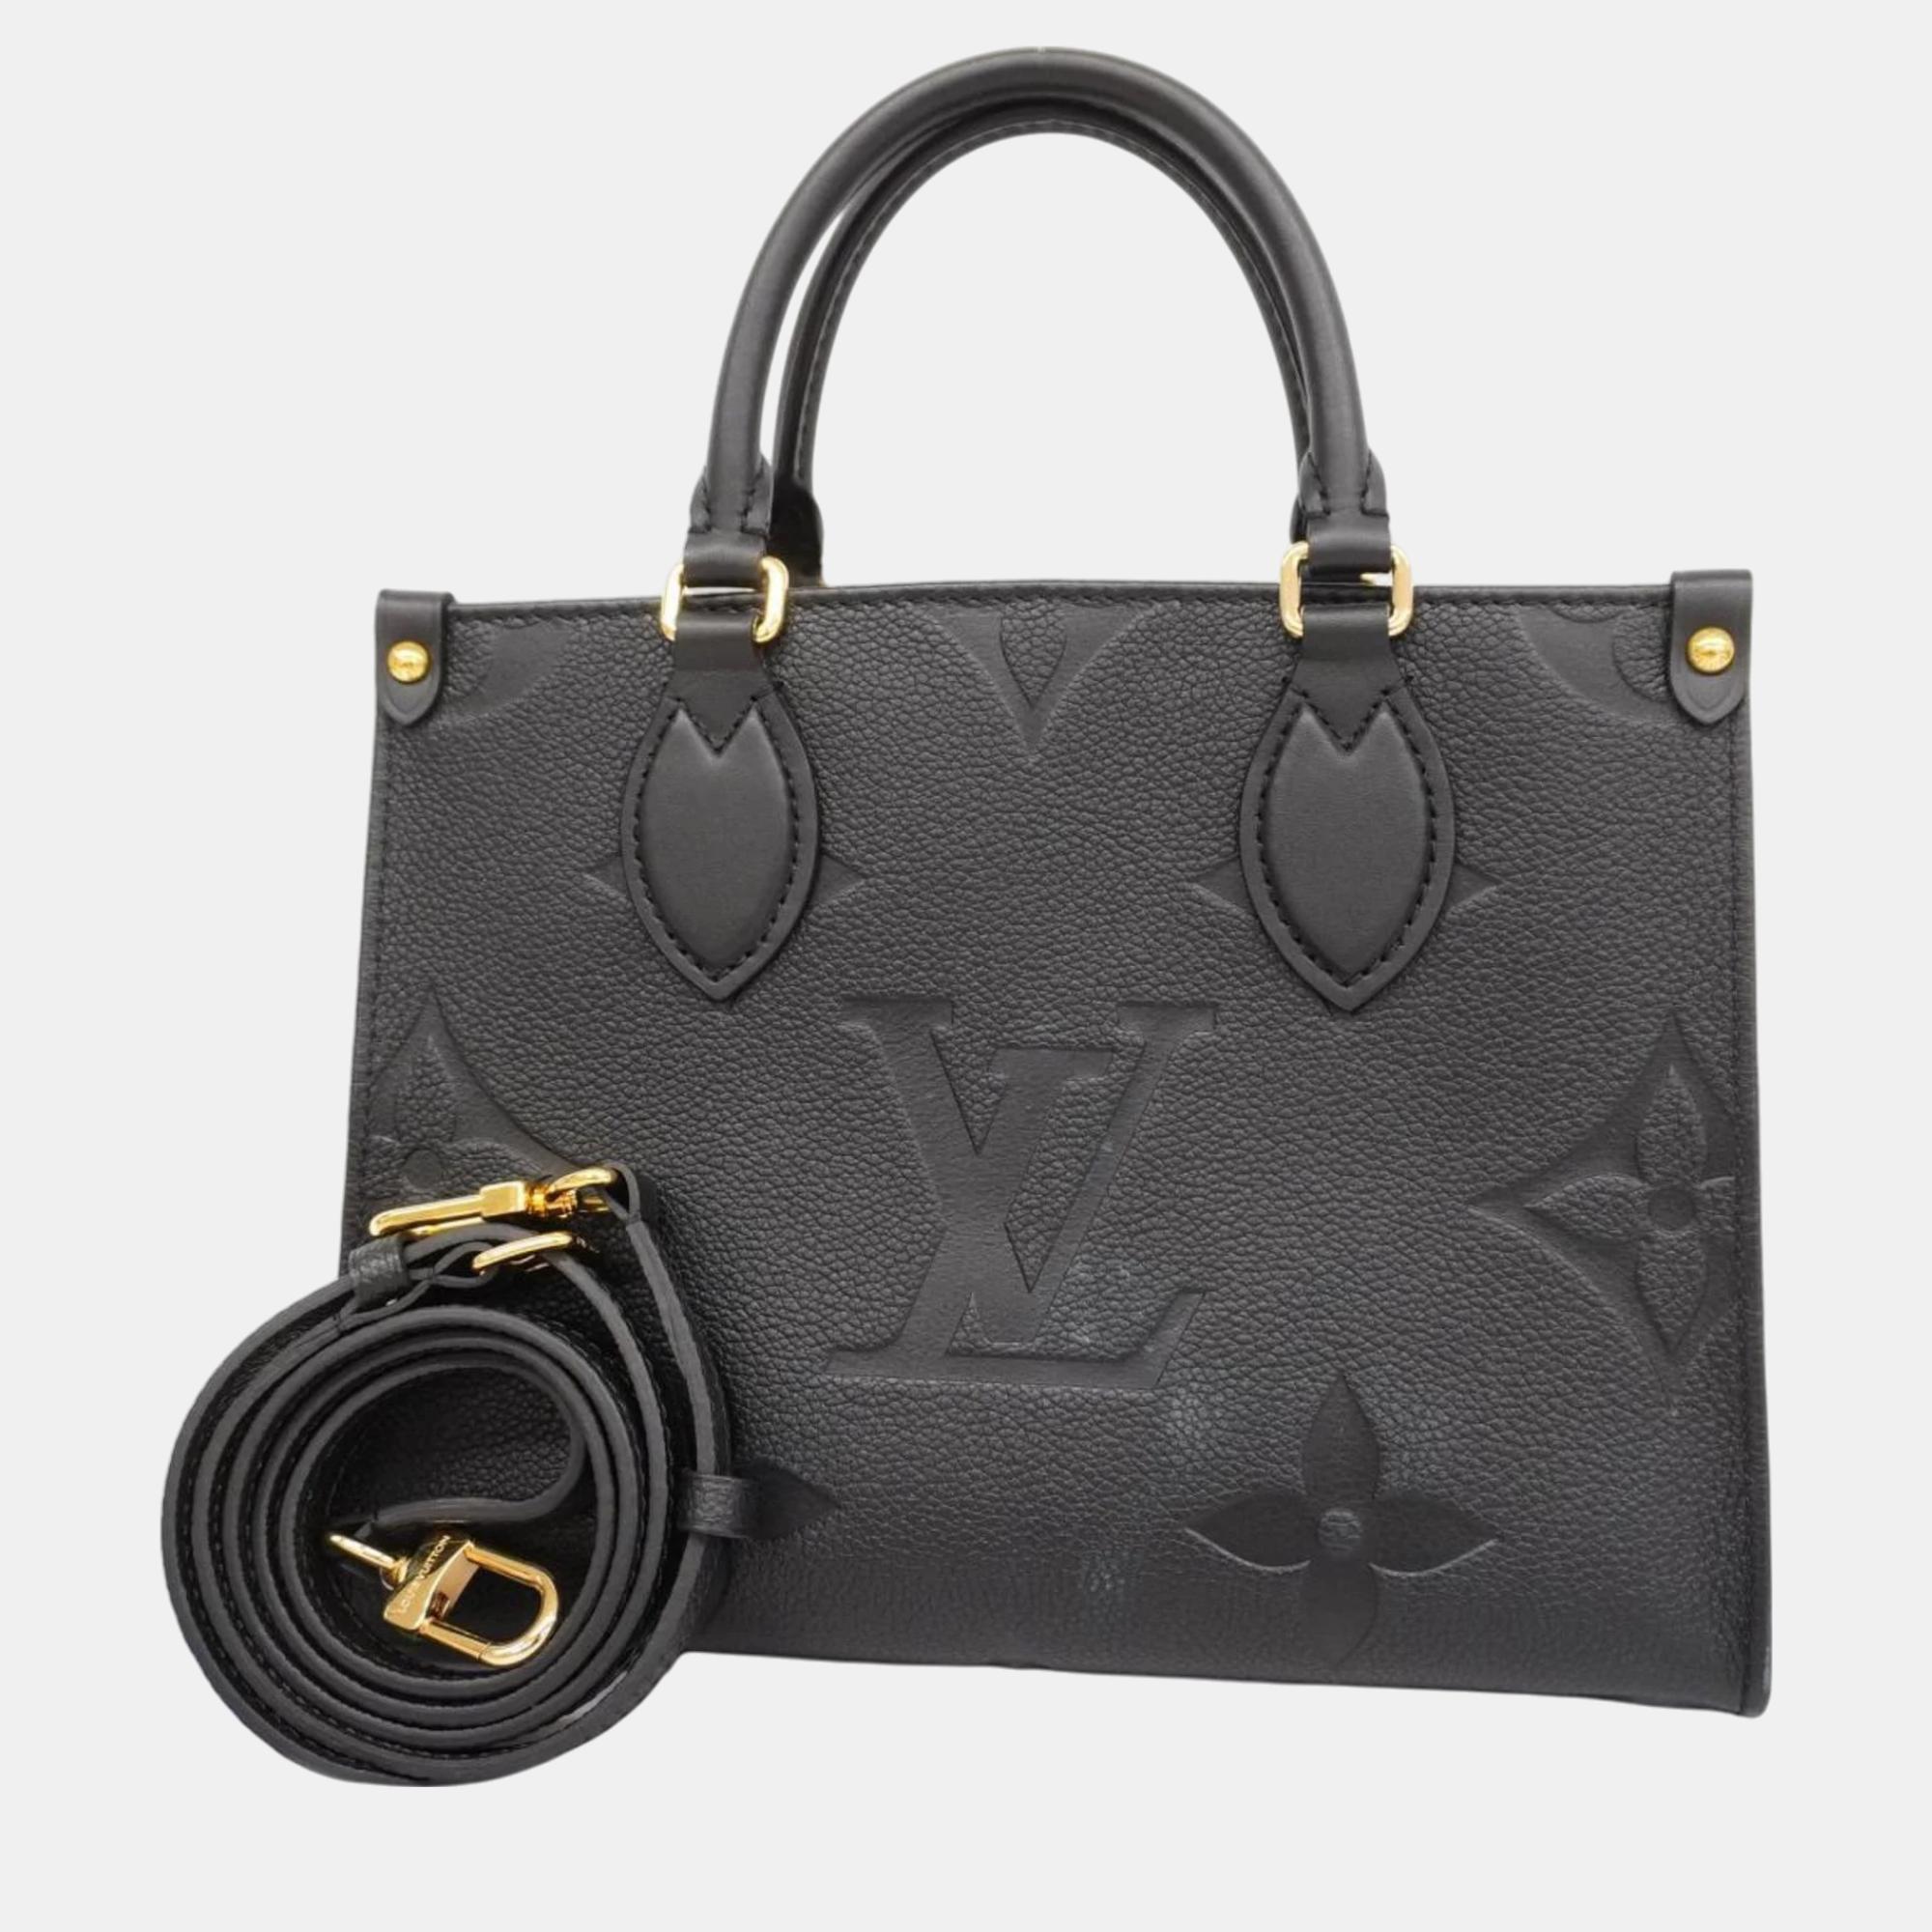 Louis vuitton black leather small onthego tote